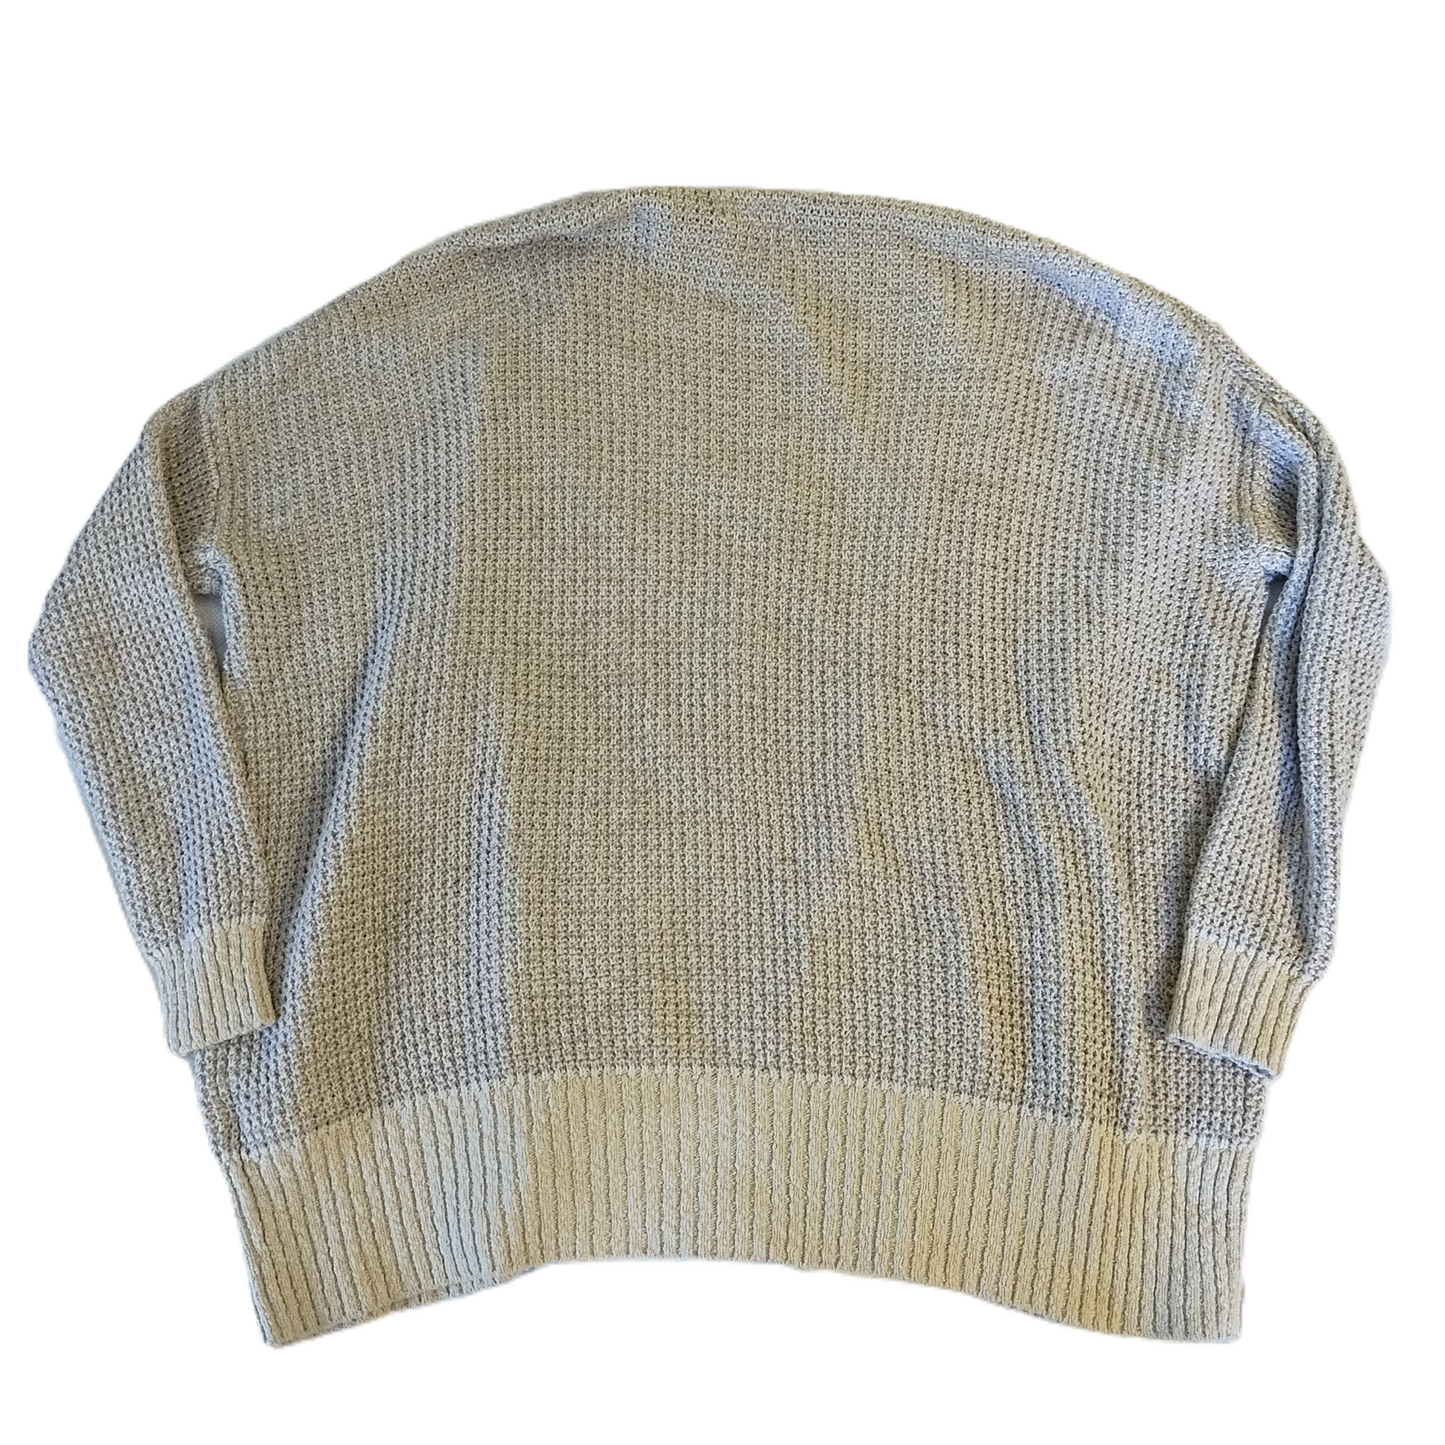 Beige Sweater Cardigan By Urban Outfitters, Size: S